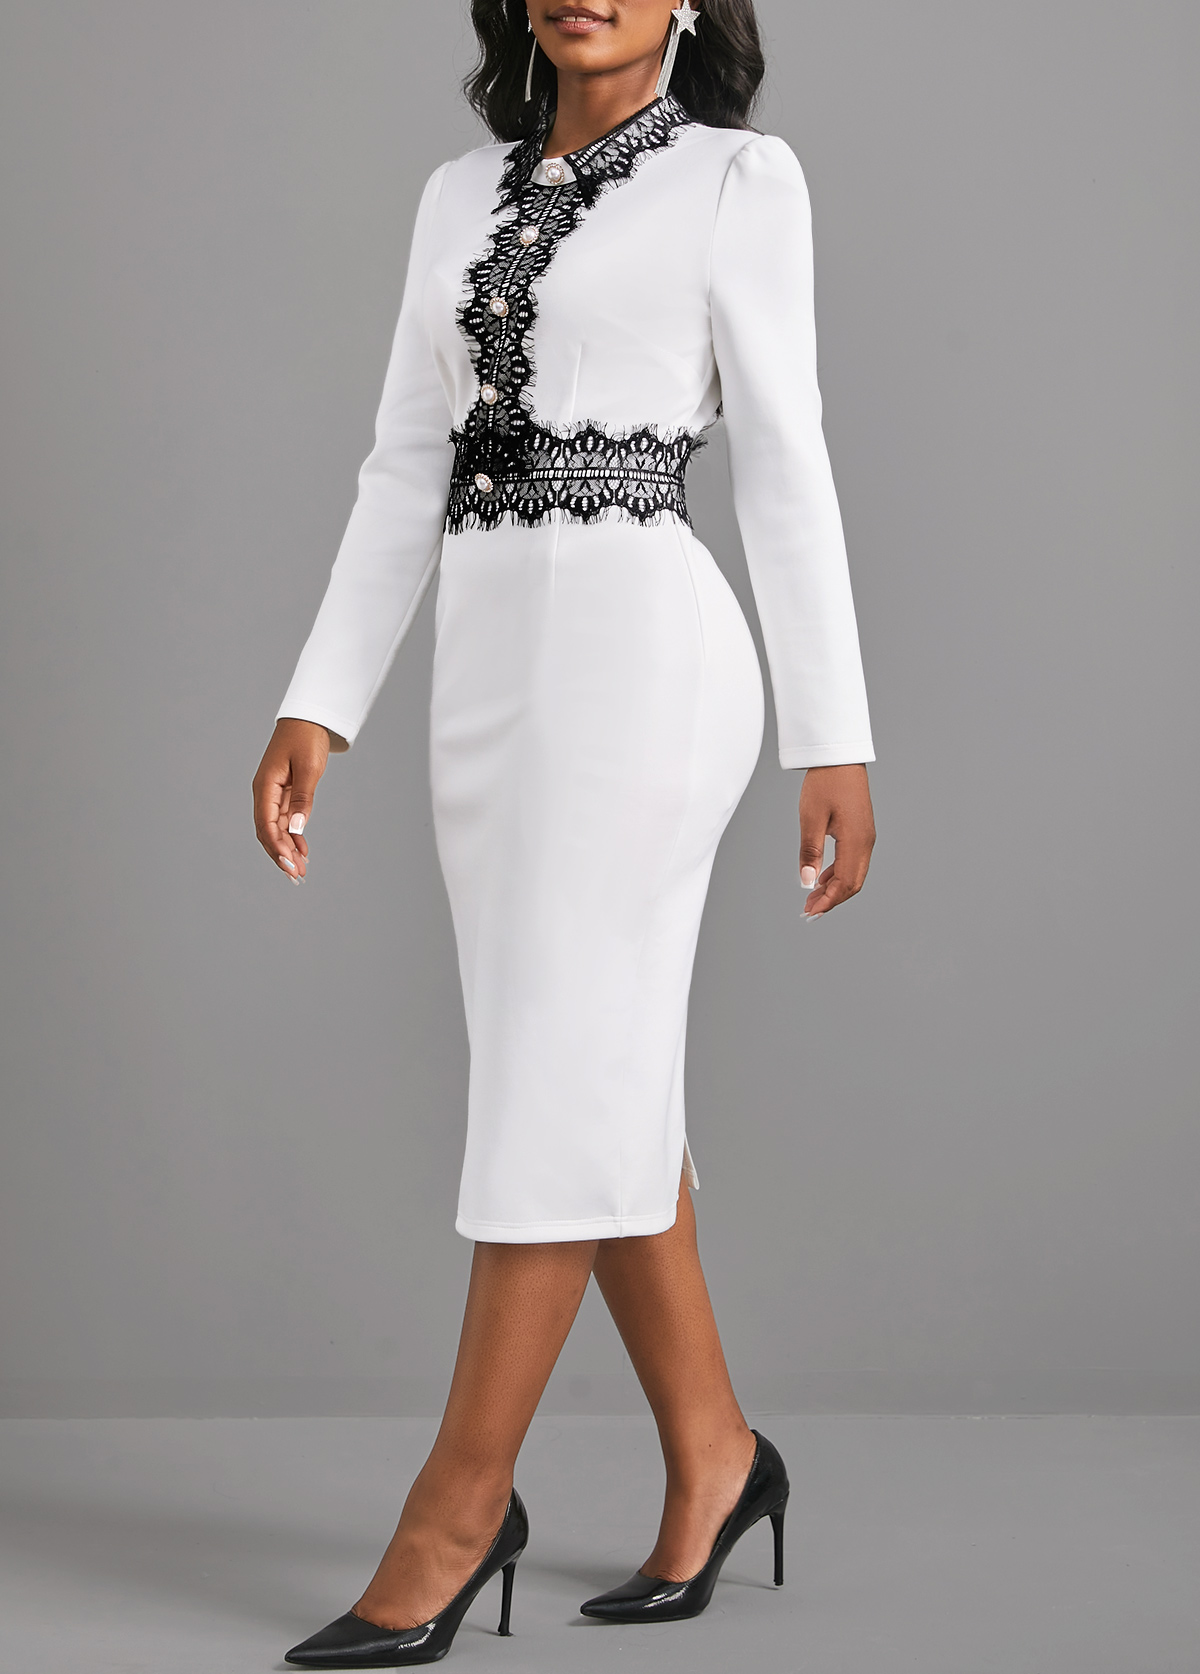 White Lace Patchwork Long Sleeve Dress